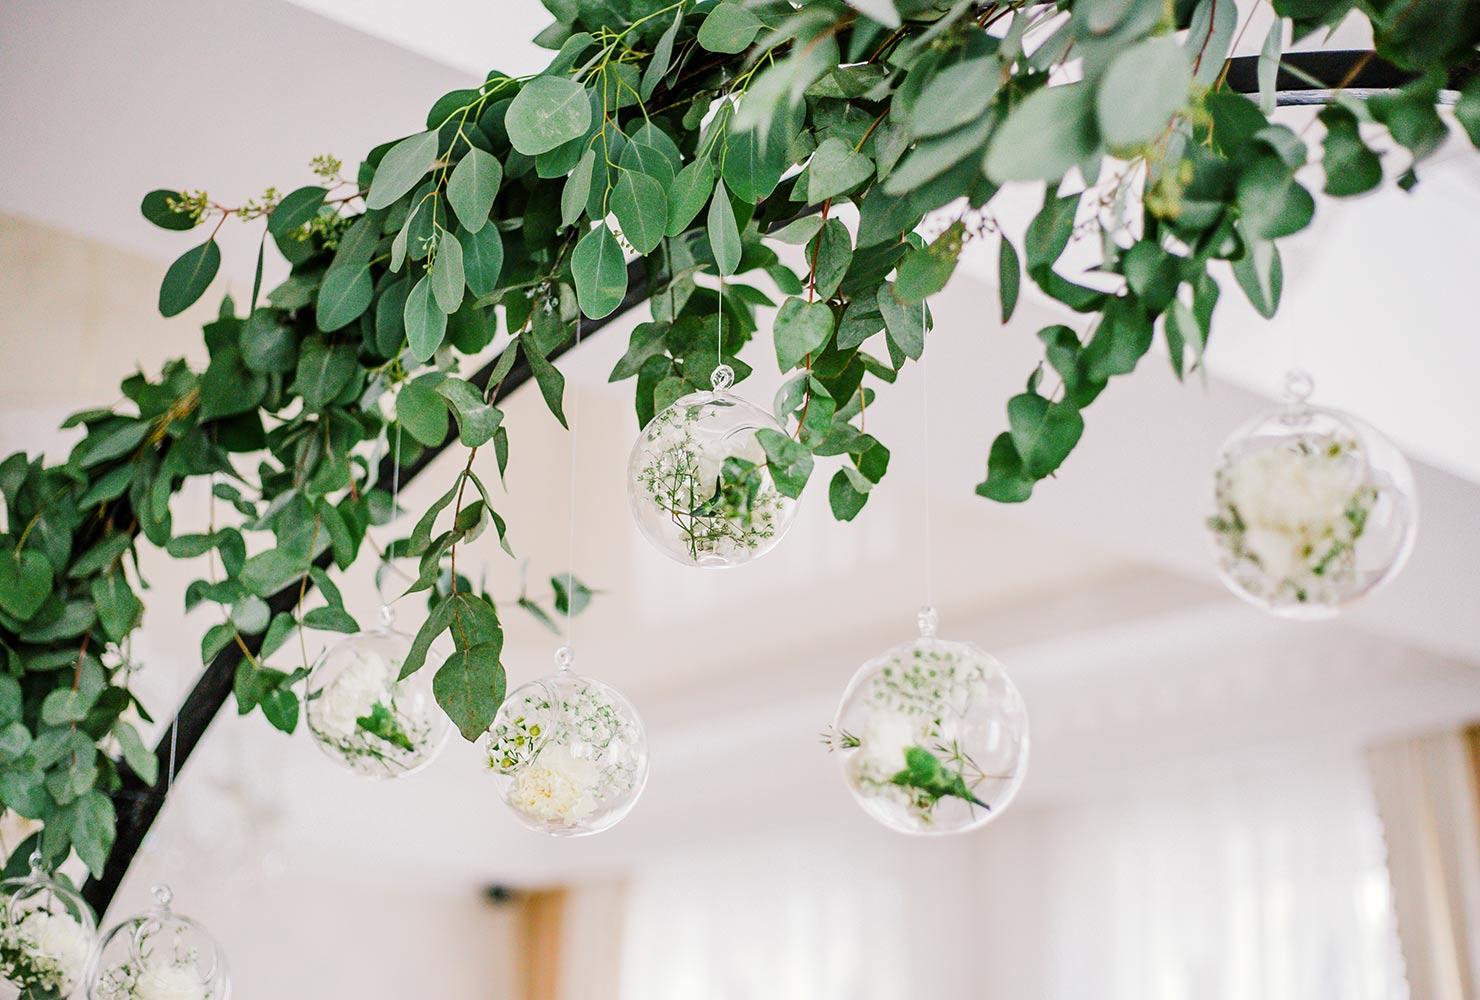 Simple sage greenery and glass ornaments.